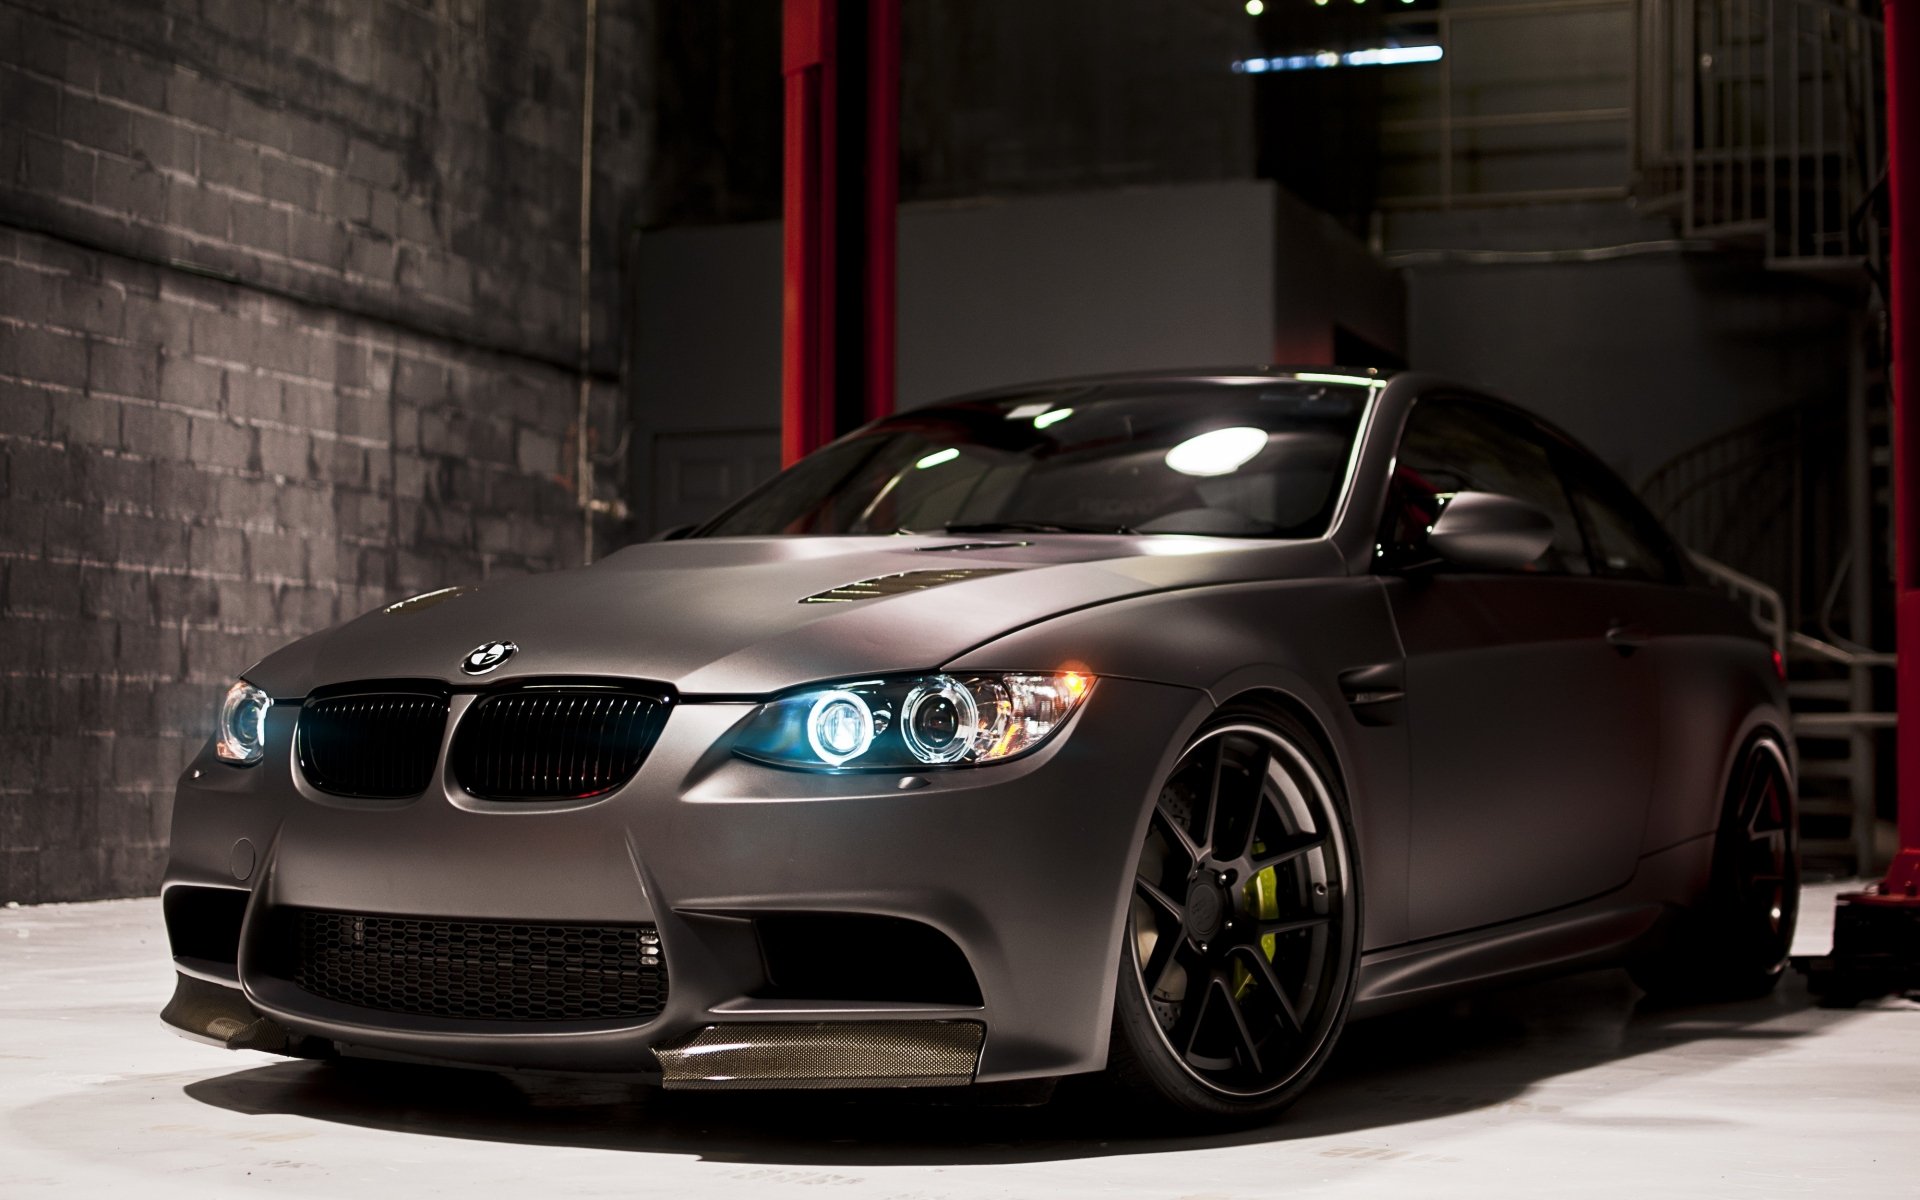 BMW M3 Full HD Wallpaper and Background Image | 1920x1200 | ID:372277